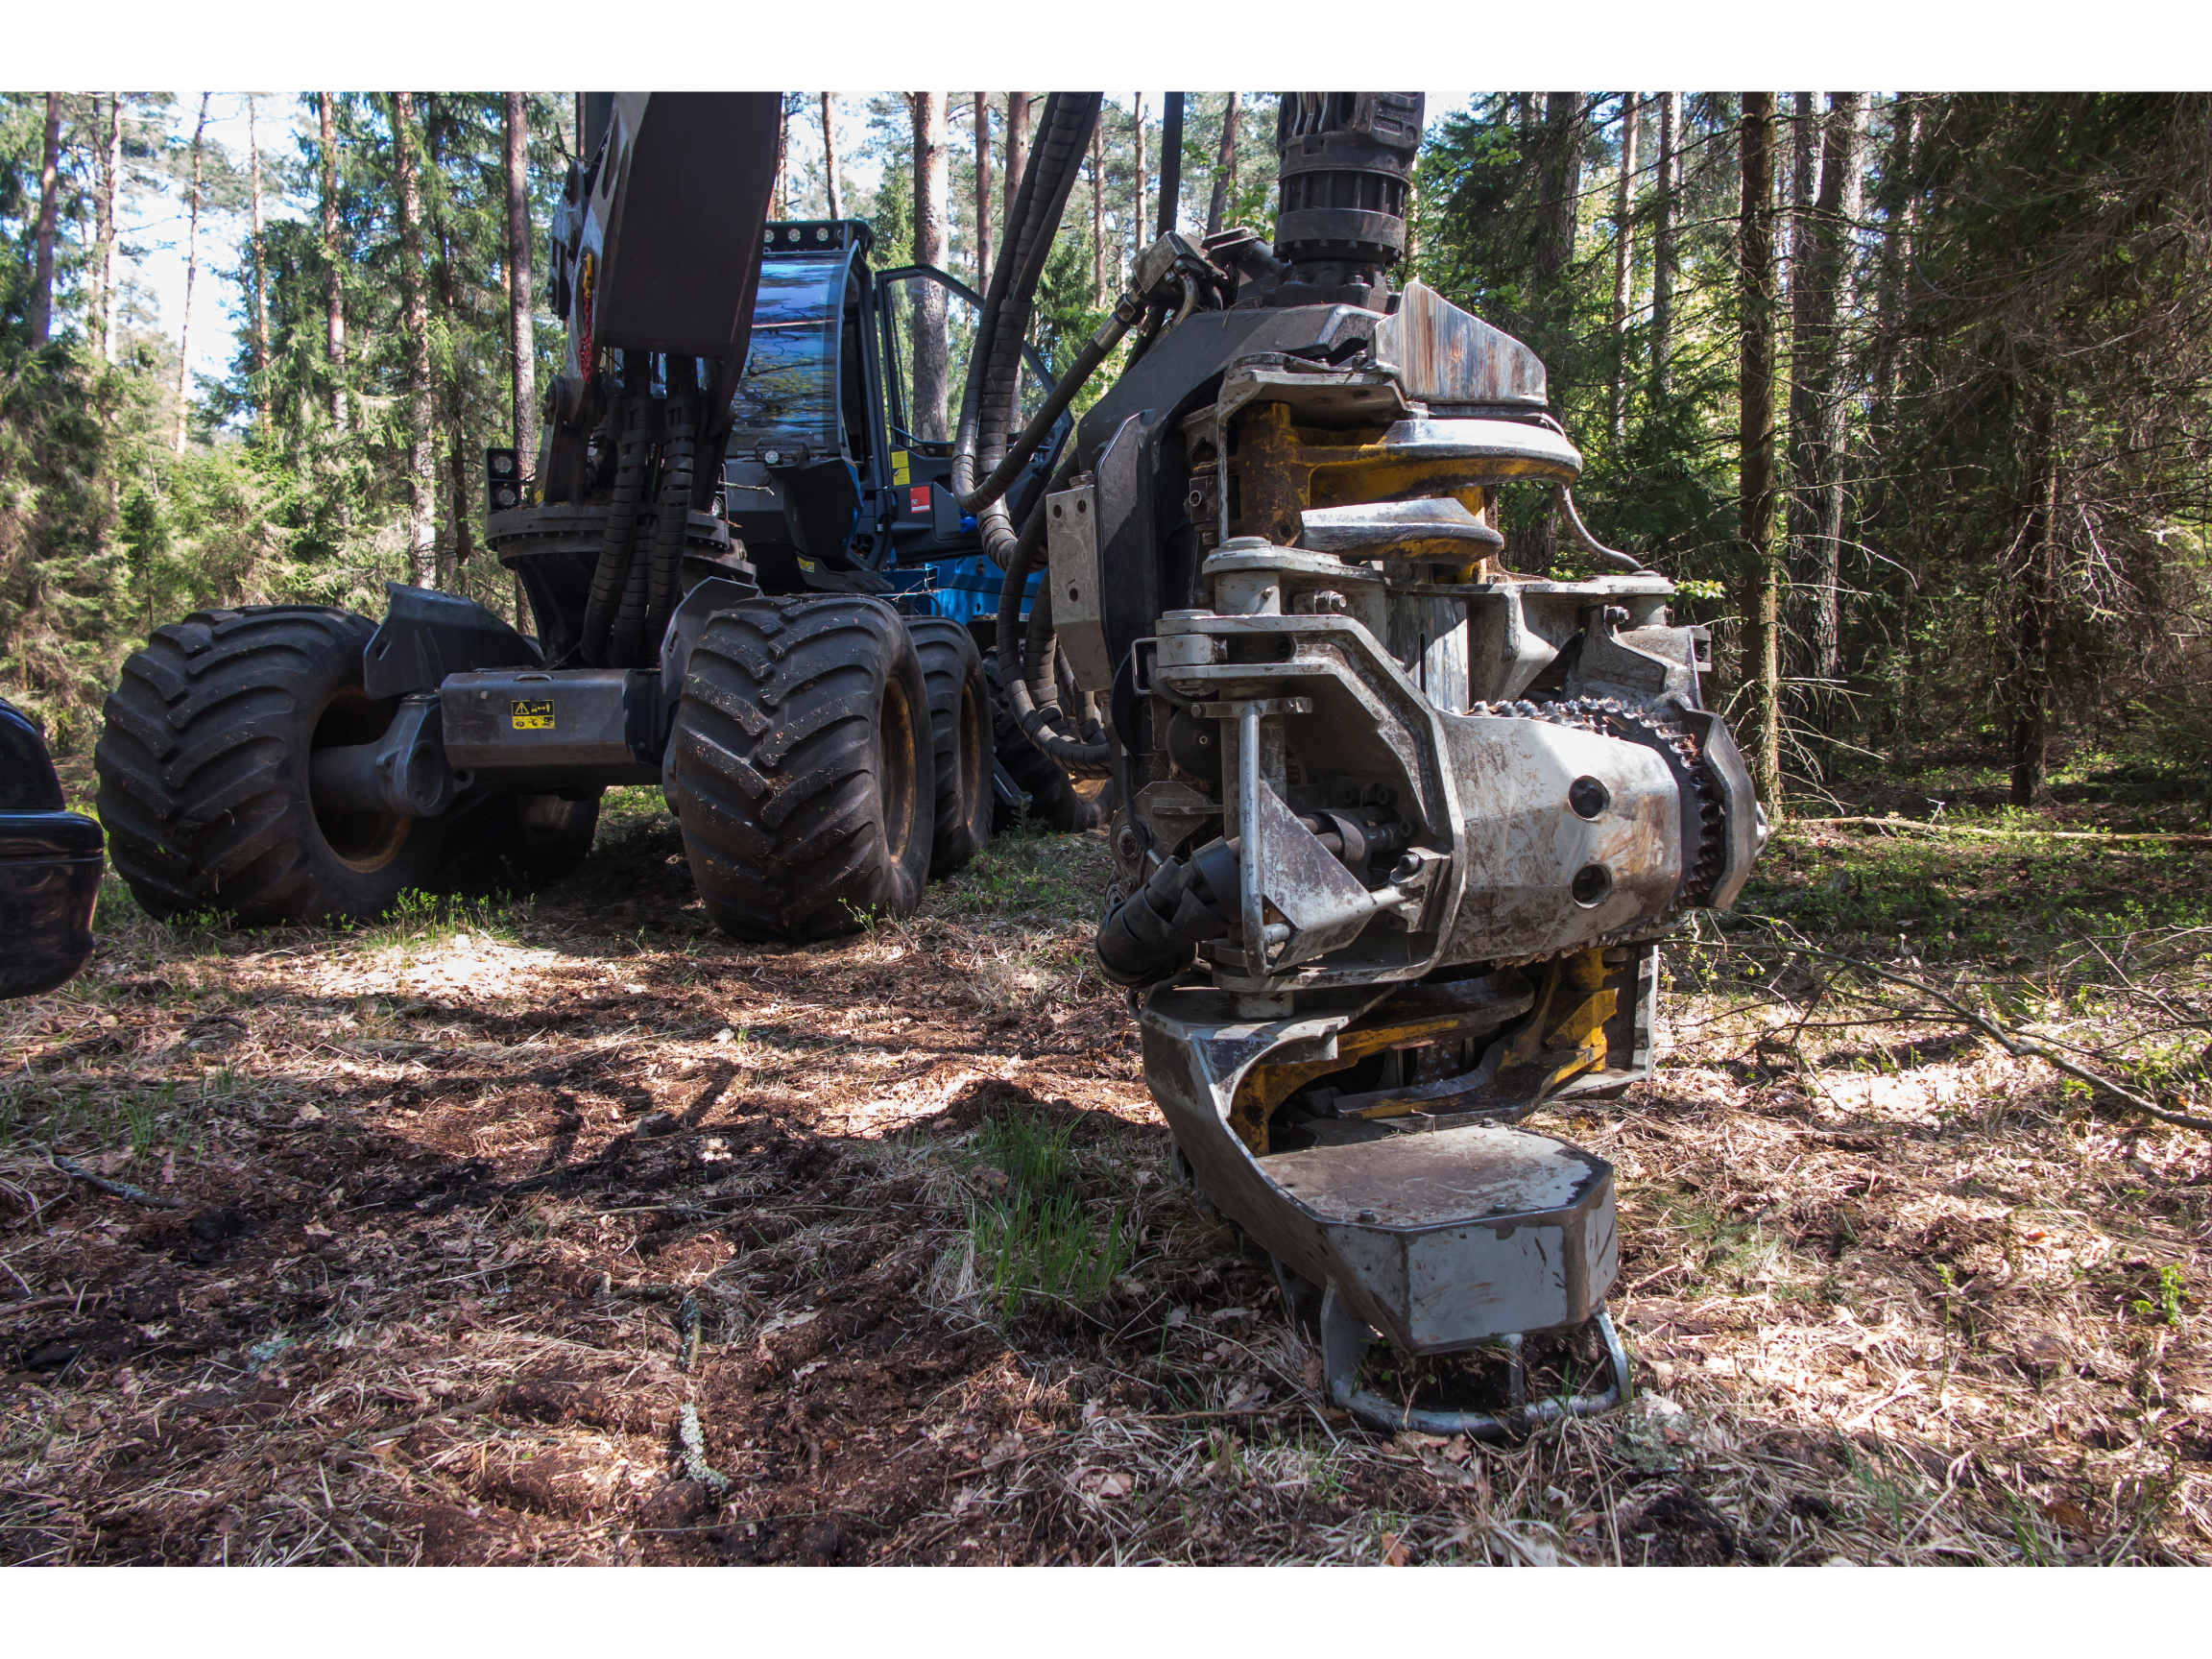 How to Transport Forestry Equipment from a Heavy Equipment Auction